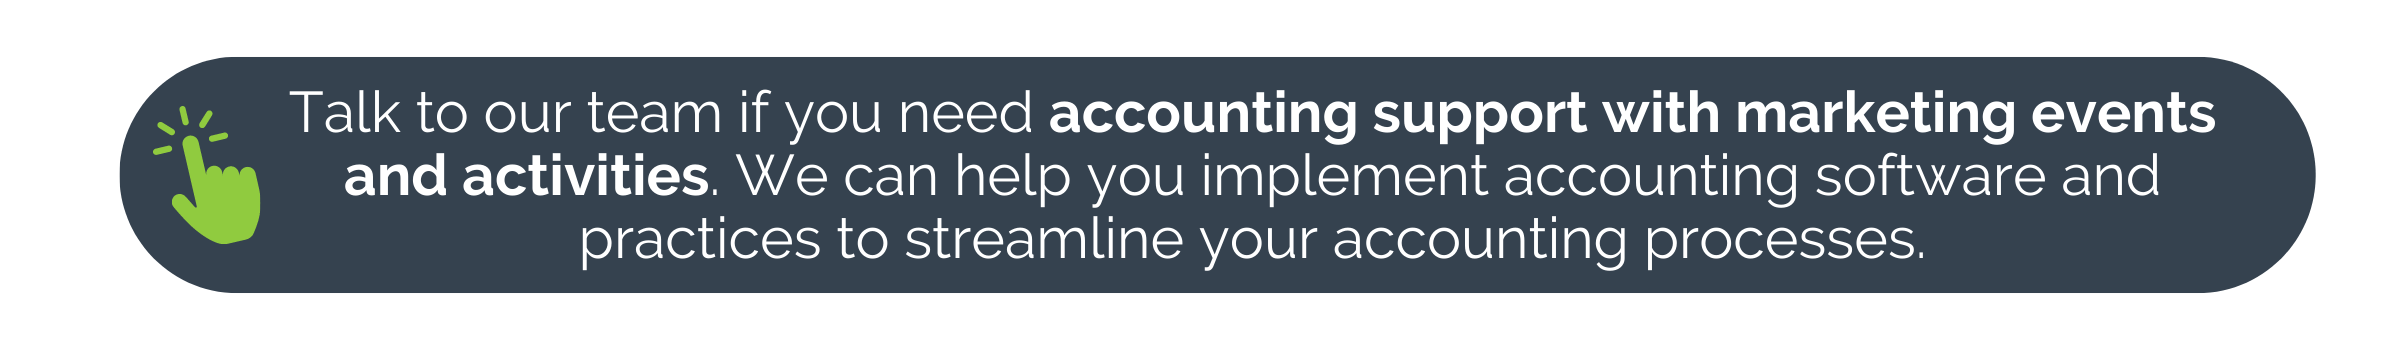 Call to action for marketing businesses that need support with accounting services for events.